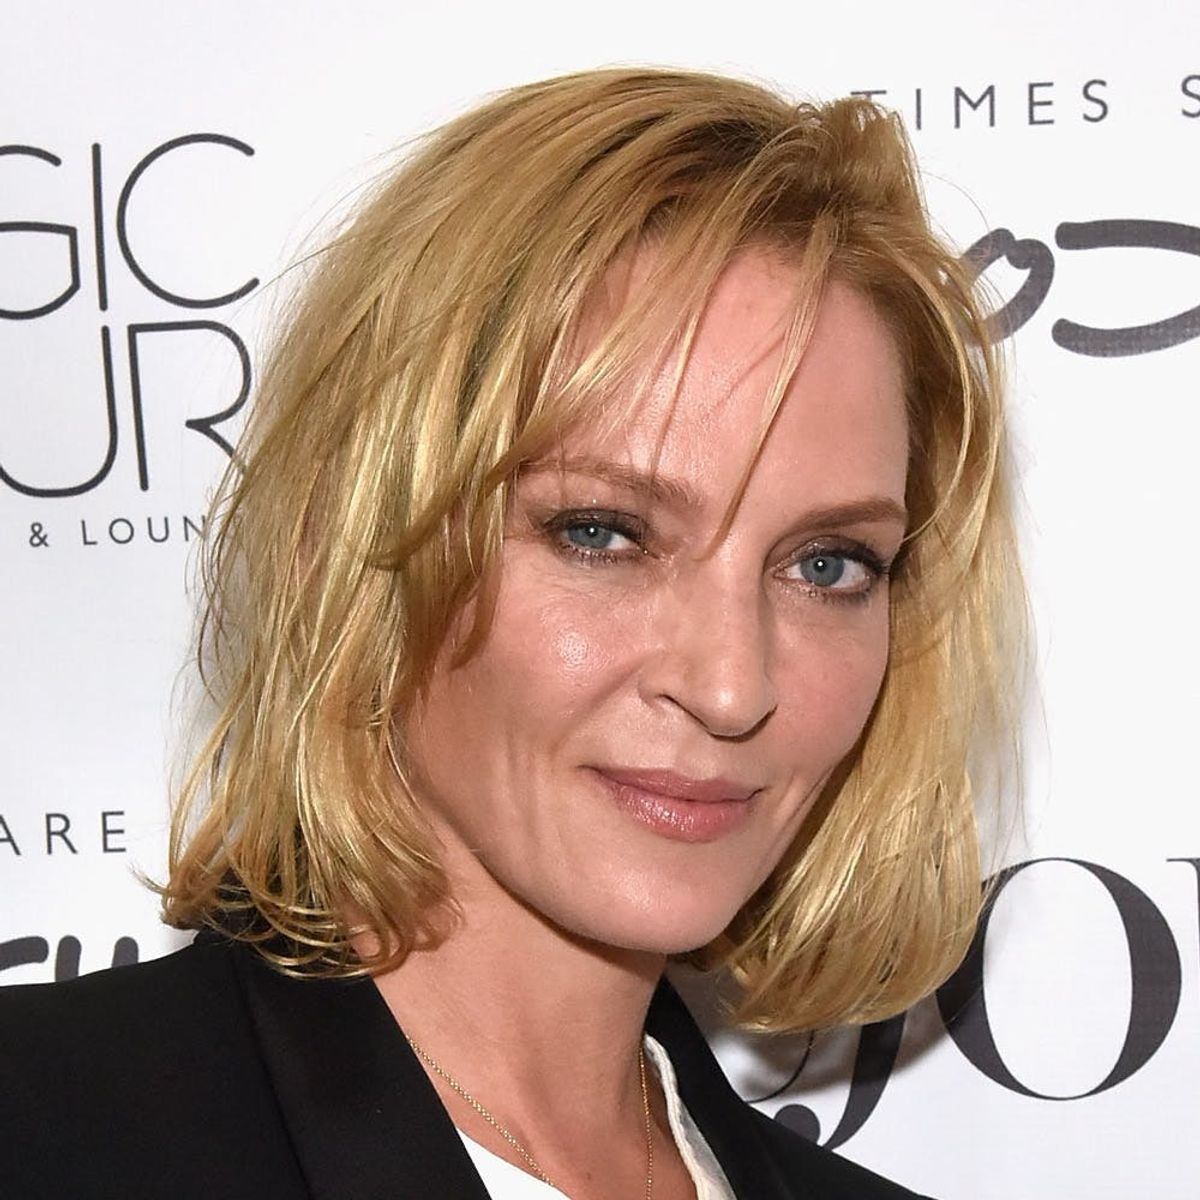 Uma Thurman Says Harvey Weinstein Attacked Her in a London Hotel Room